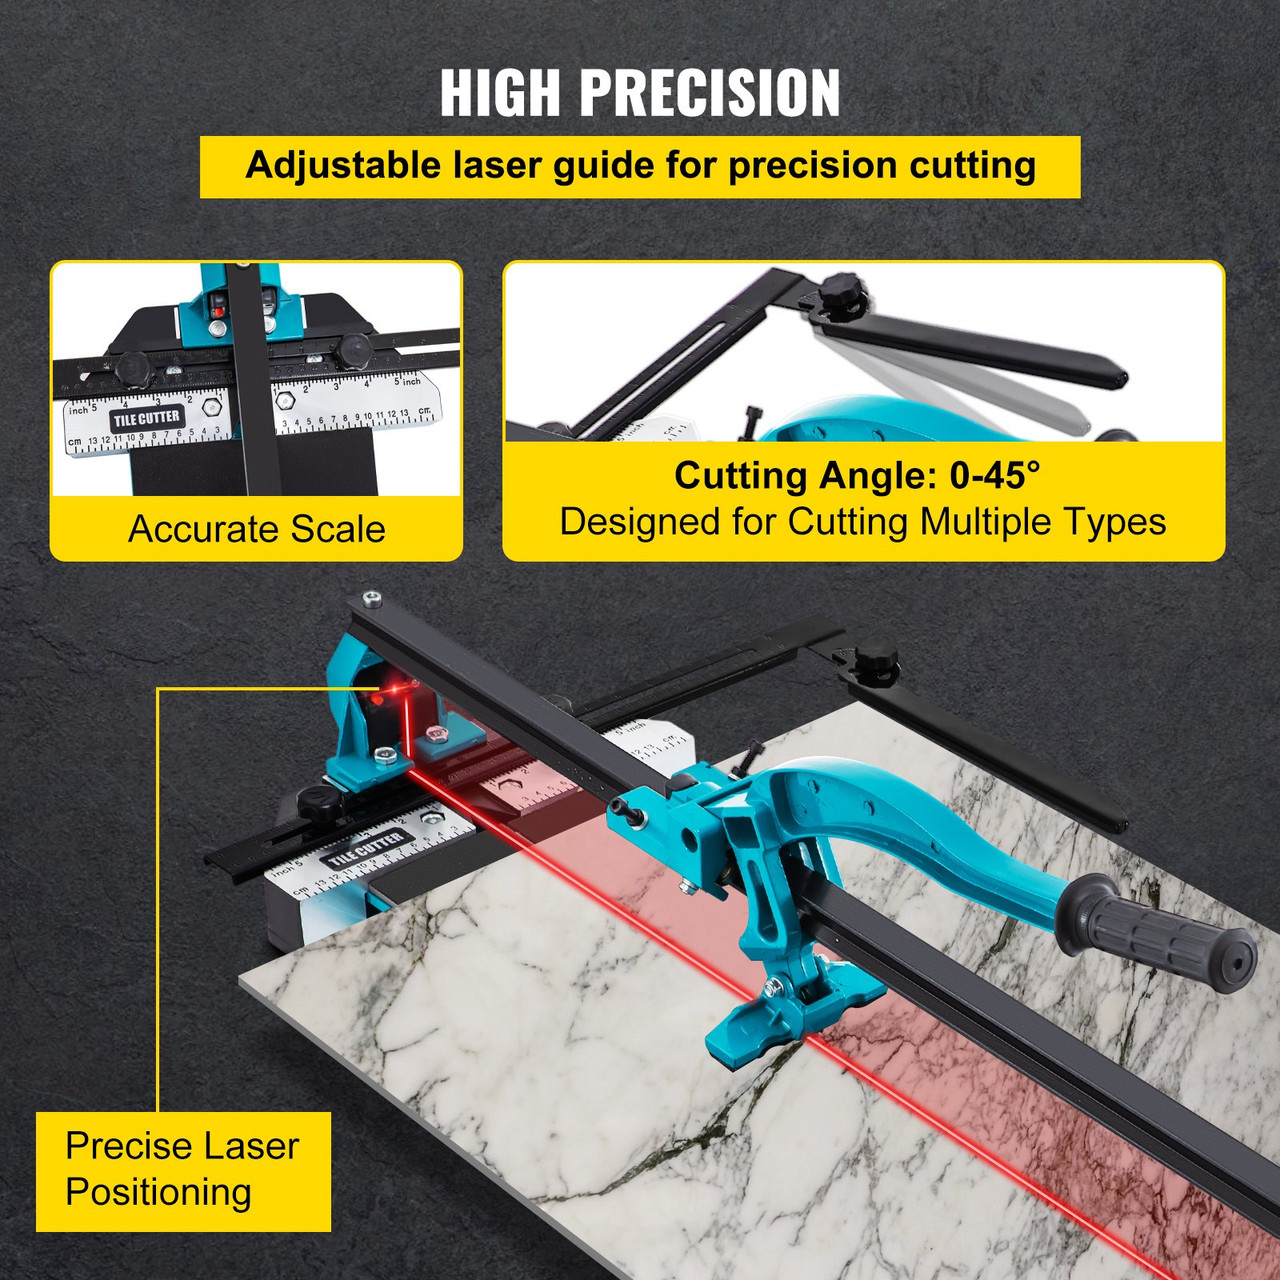 Tile Cutter, 24 Inch Manual Tile Cutter, Tile Cutter Tools w/Single Rail Double Brackets, 3/5 in Cap w/Precise Laser Guide, Tile Cutter Porcelain Tools for Precision Cutting Porcelain Tiles